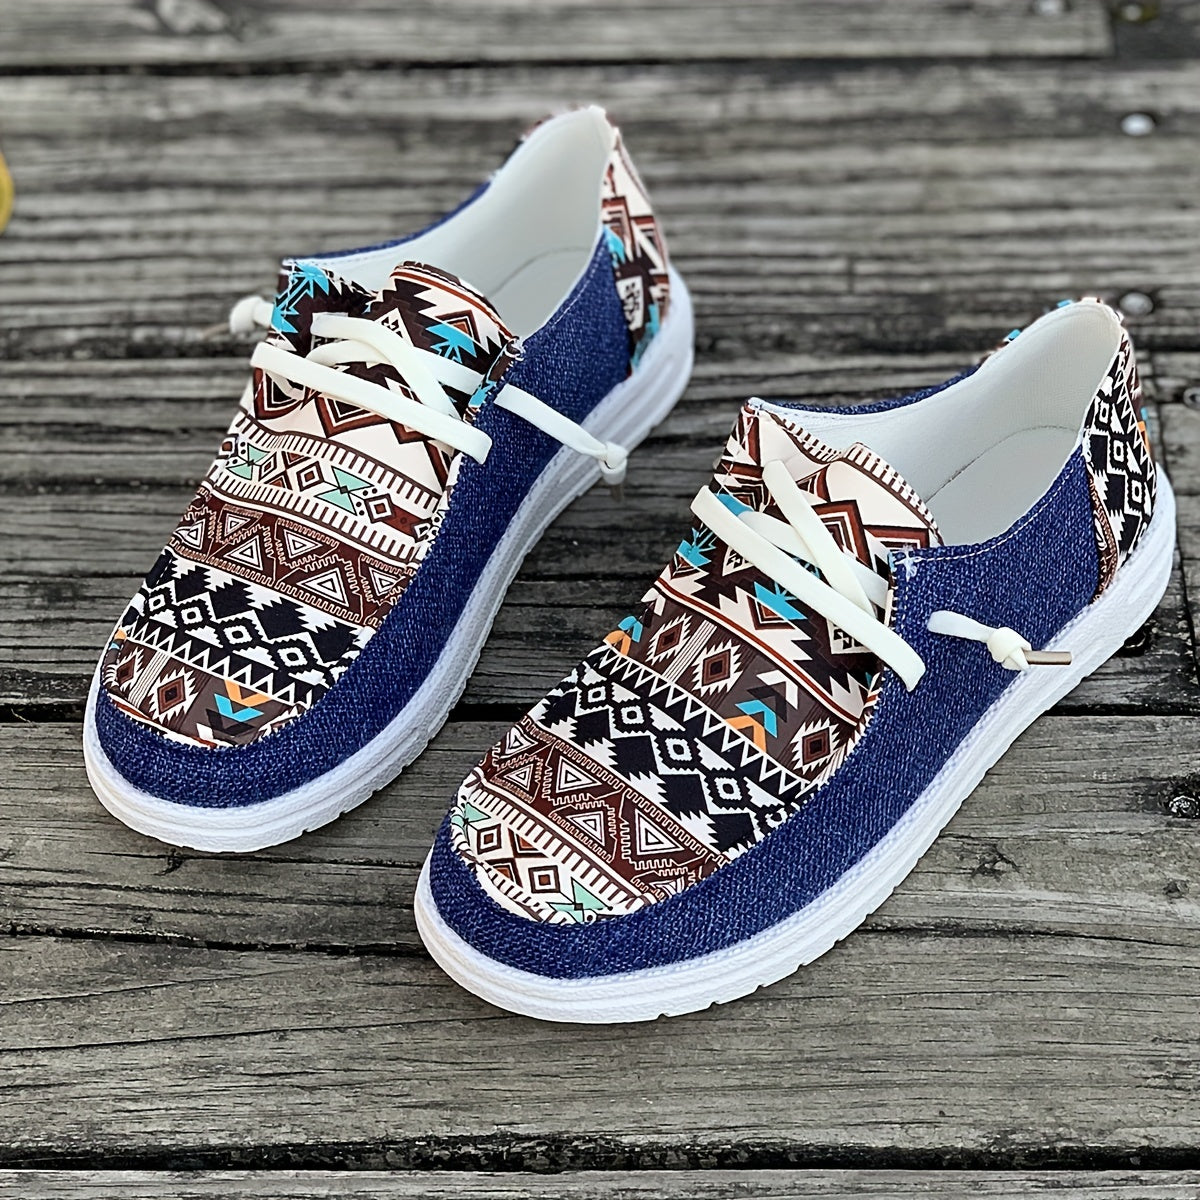 Women's Tribal Pattern Canvas Shoes, Round Toe Low Top Flat Sneakers, Casual Lightweight Walking Shoes